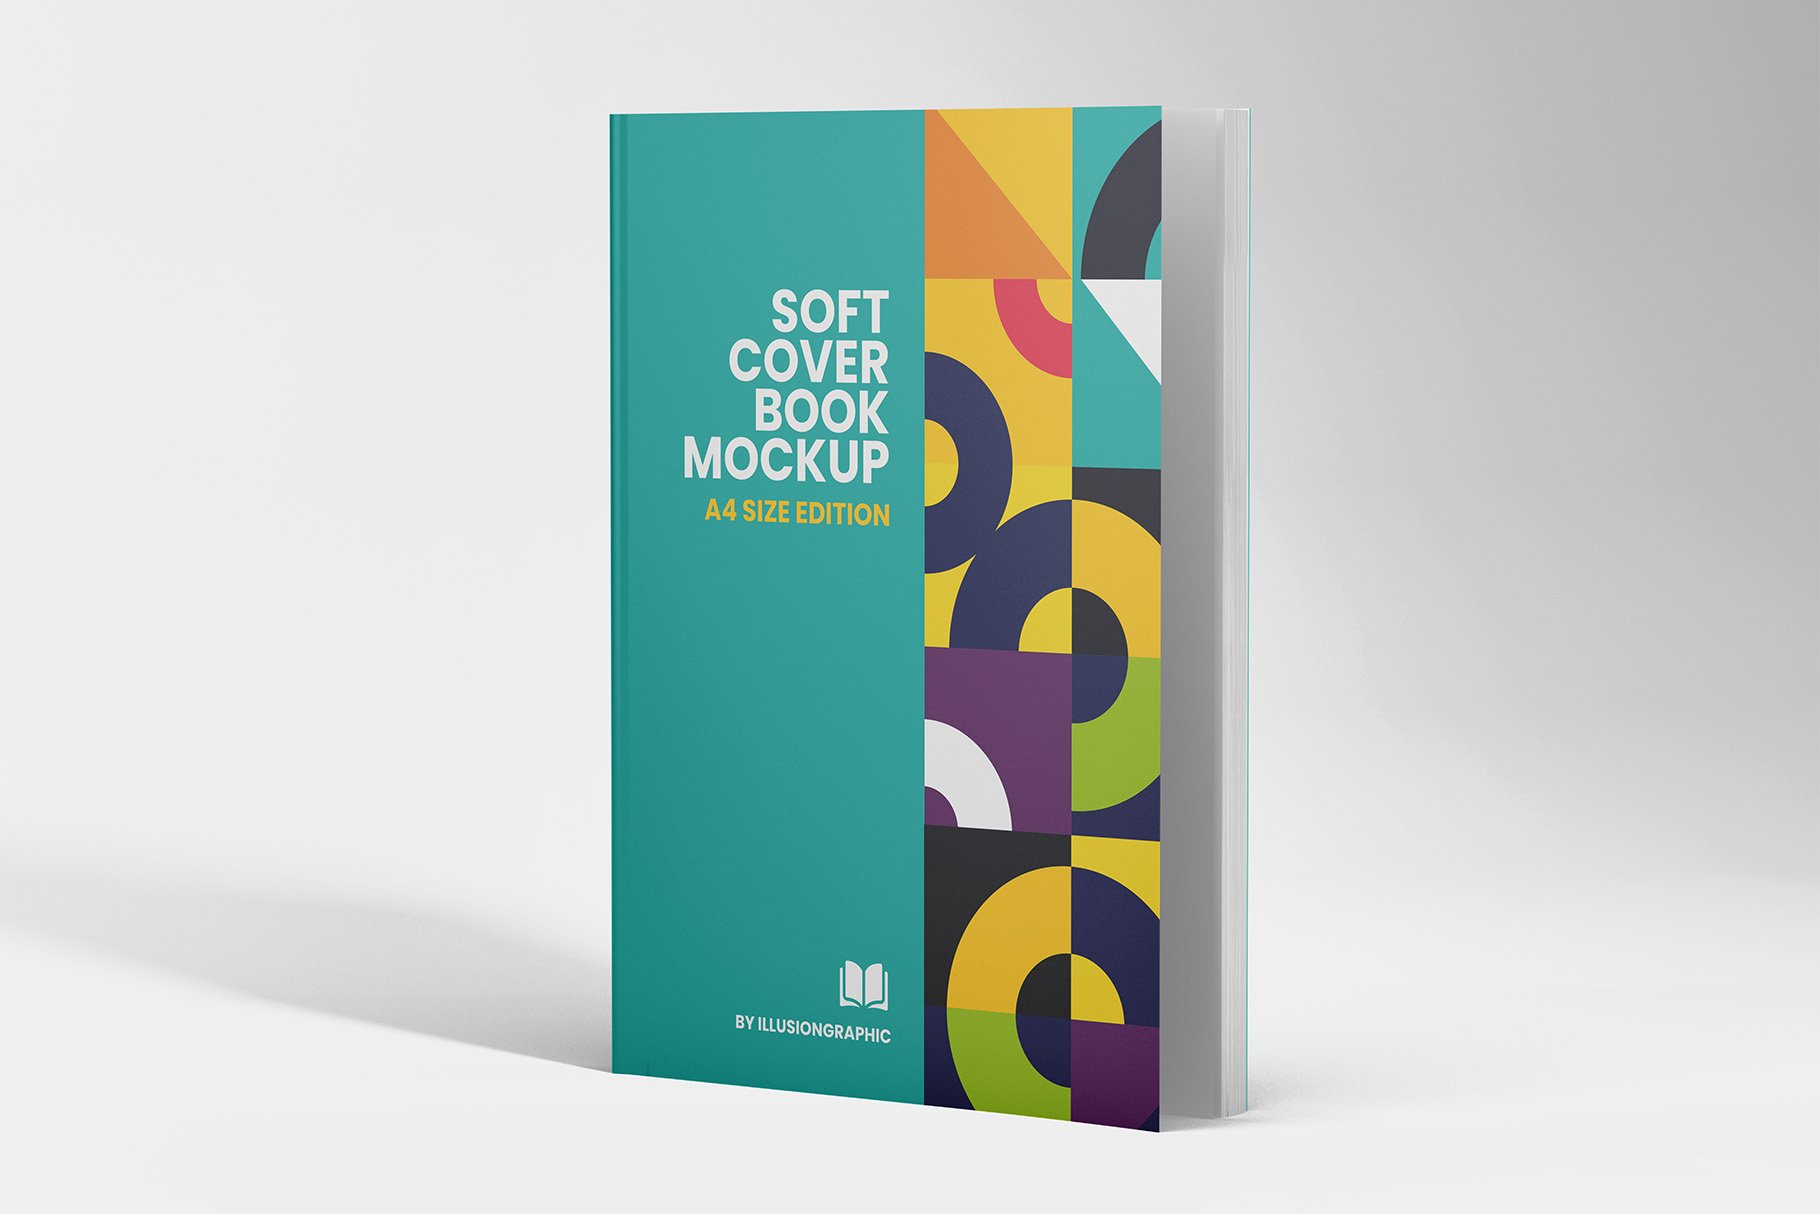 Soft Cover Book Mockup - A4 preview image.